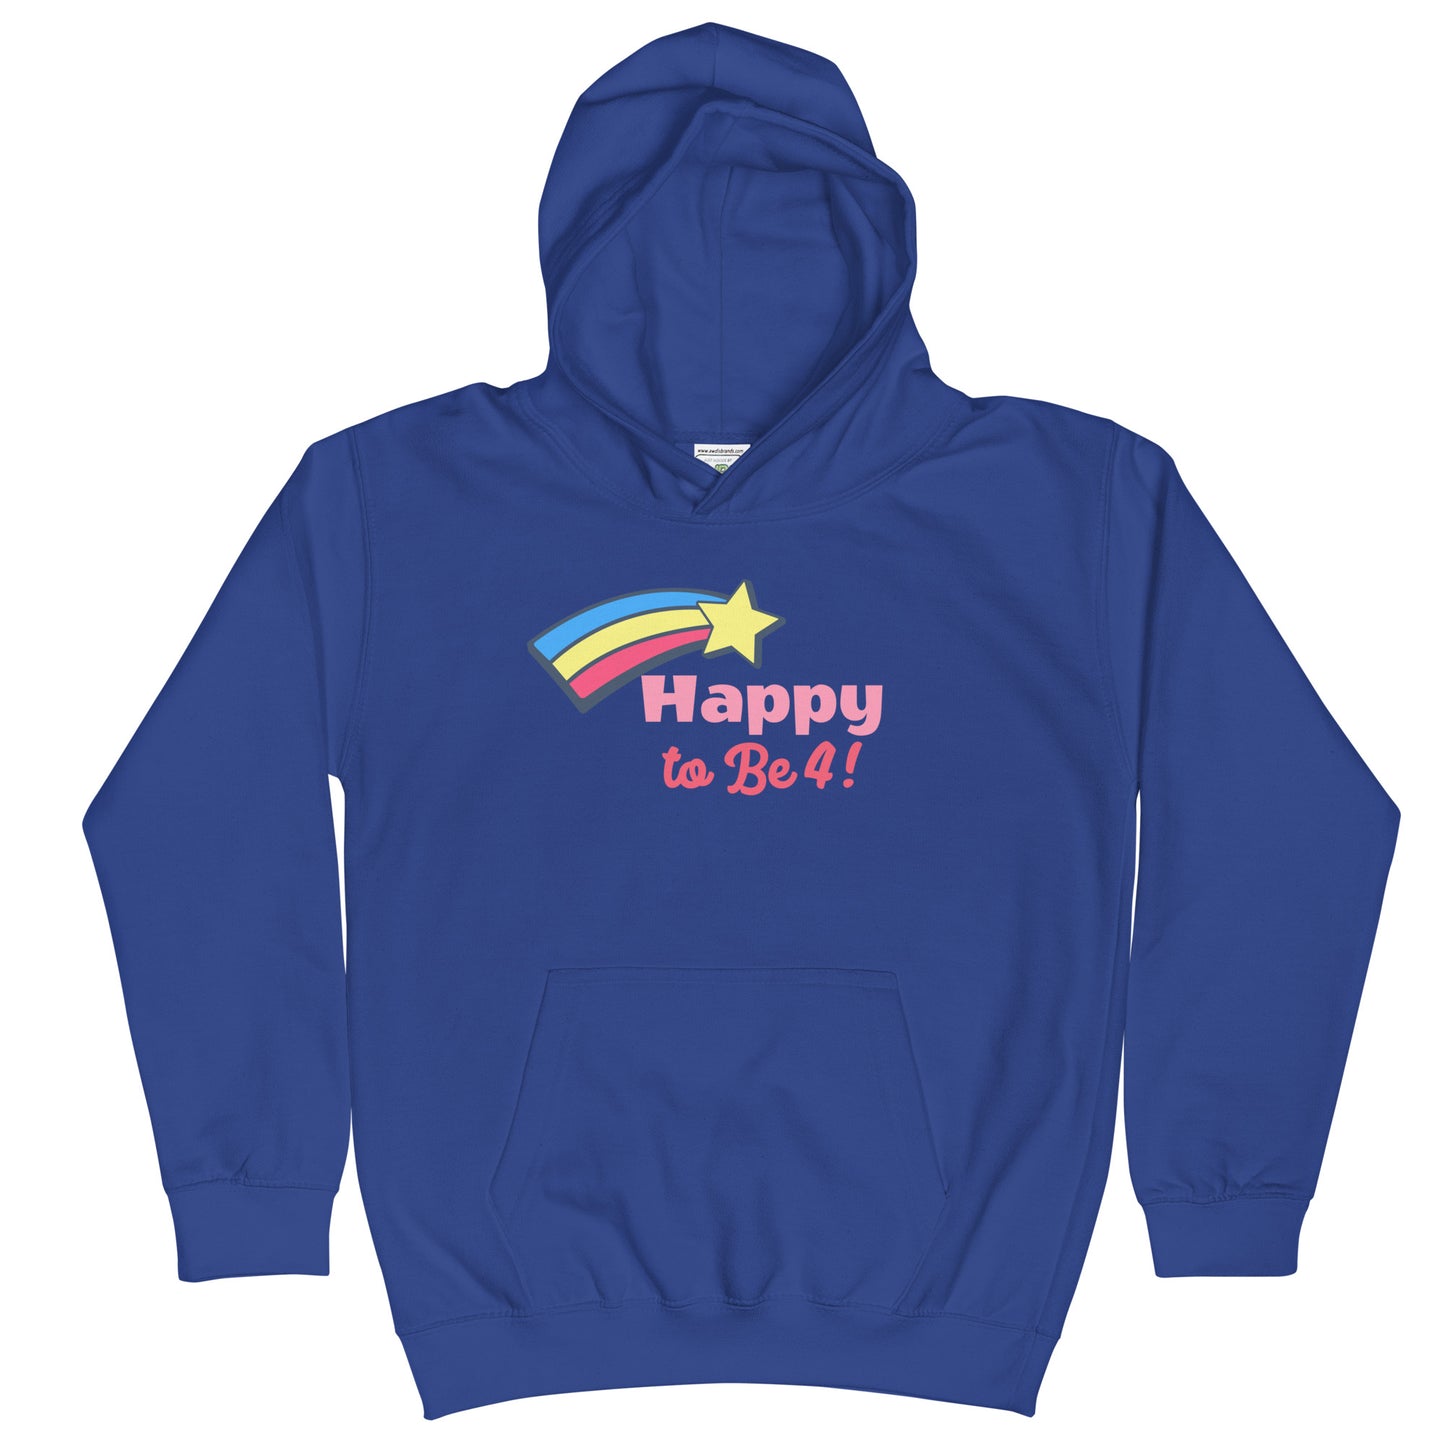 Kids Personalized Graphic Customized Birthday Gift Hoodie Select Age Happy To Be 4-13 Years!